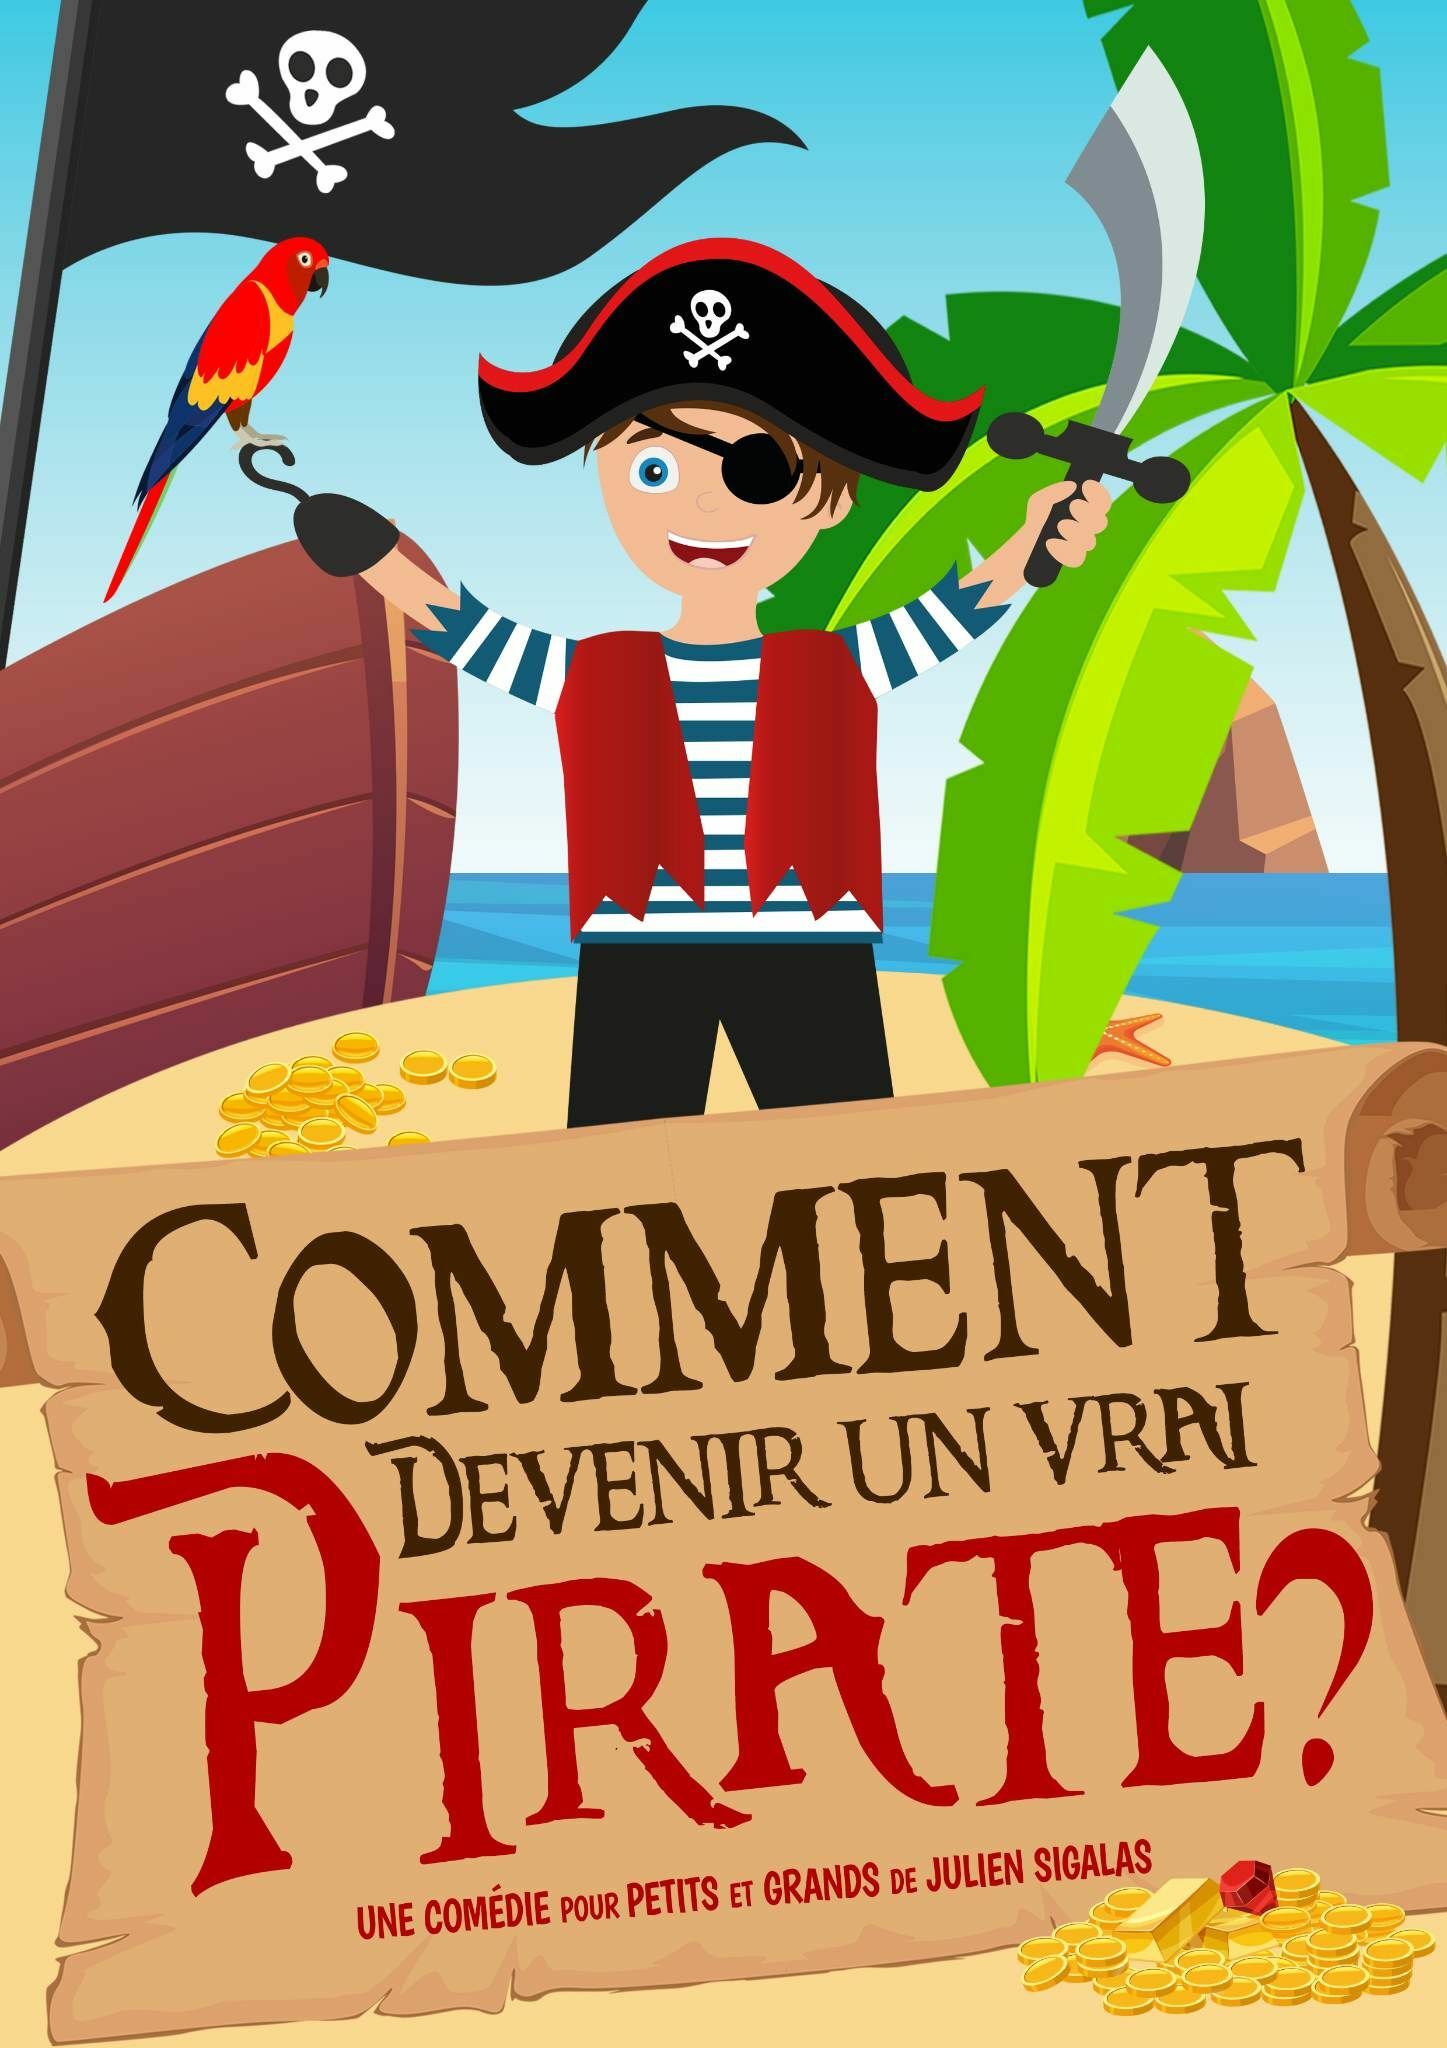 How to become a real pirate? - Theater